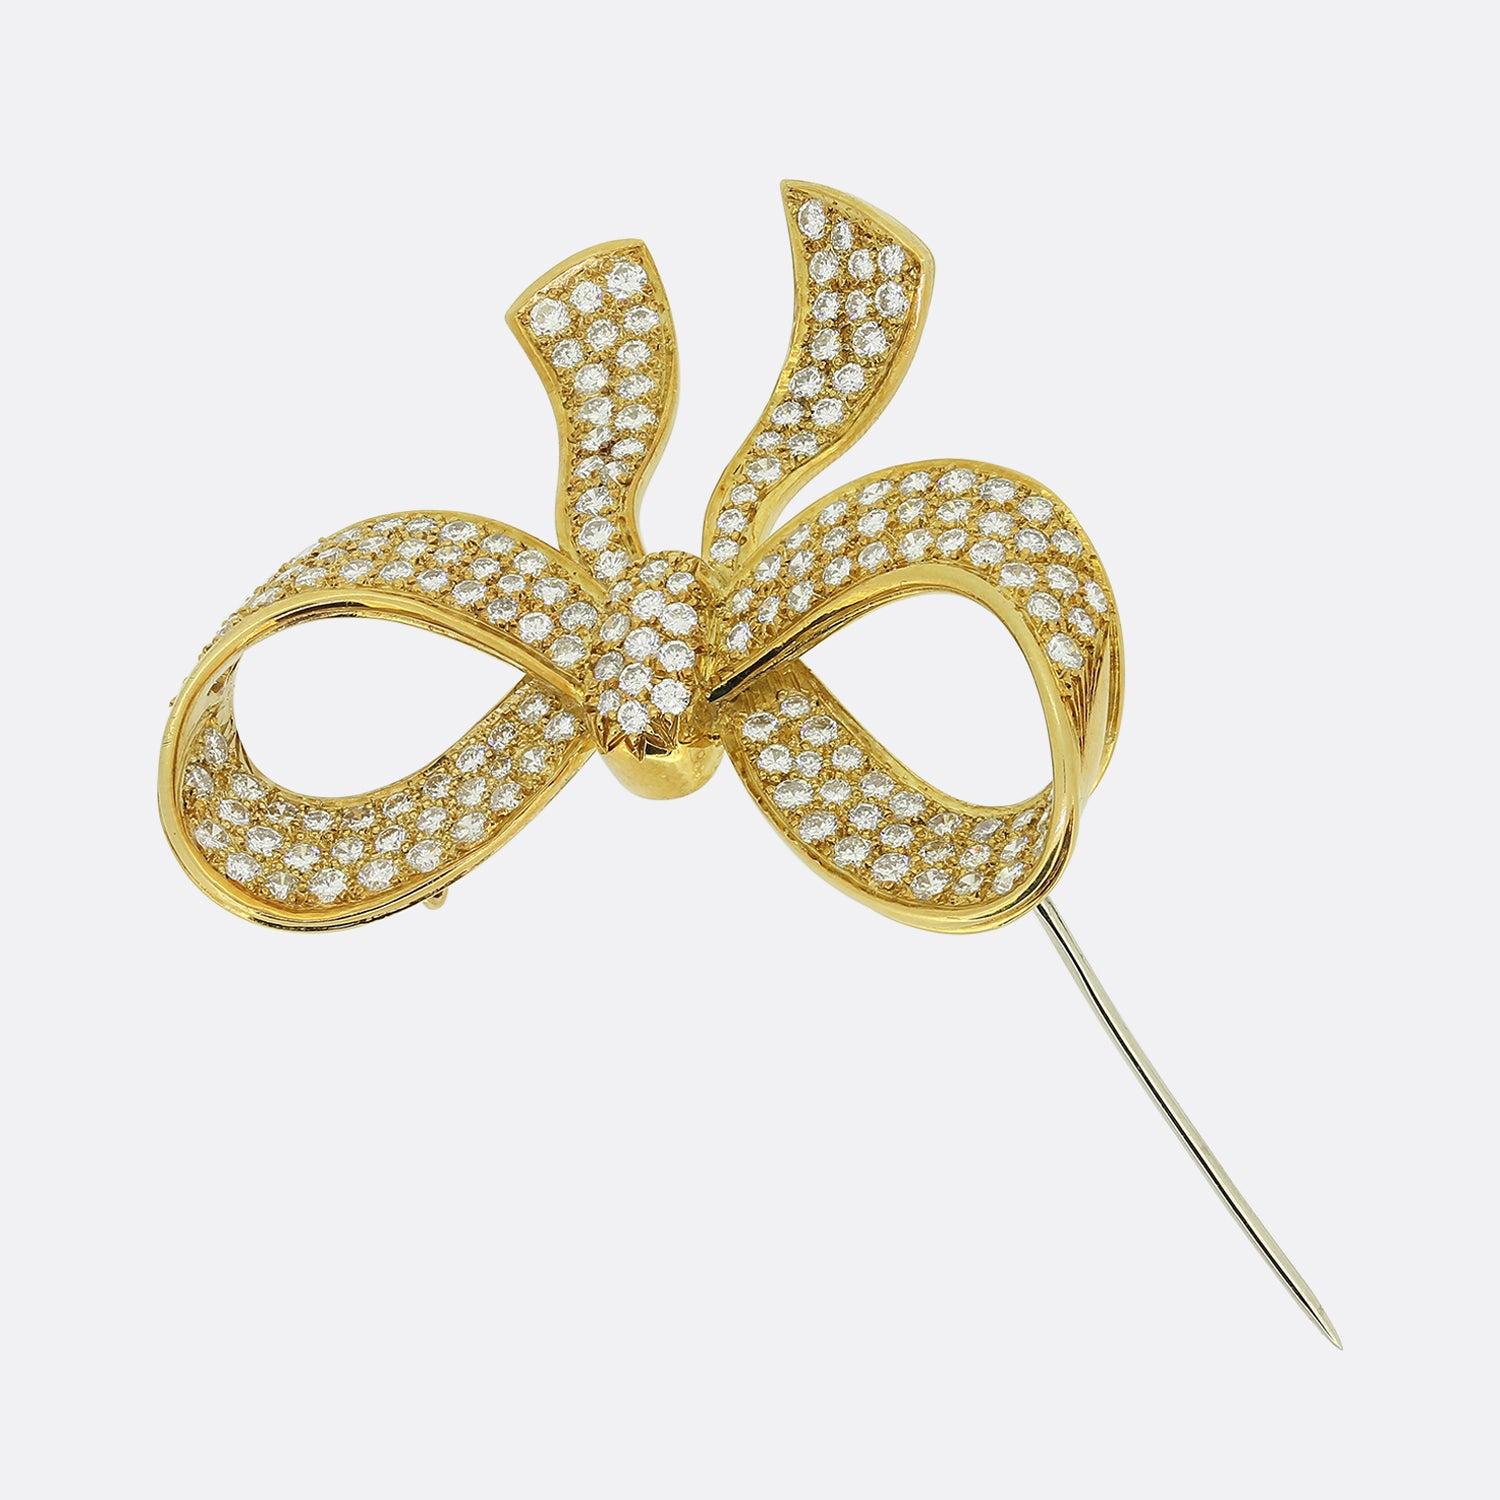 Here we have a truly wonderful vintage diamond bow brooch. The brooch is crafted in 18ct yellow gold and features over 3 carats of exceptional quality diamonds. The diamonds are round brilliant cuts and well matched for colour and clarity.